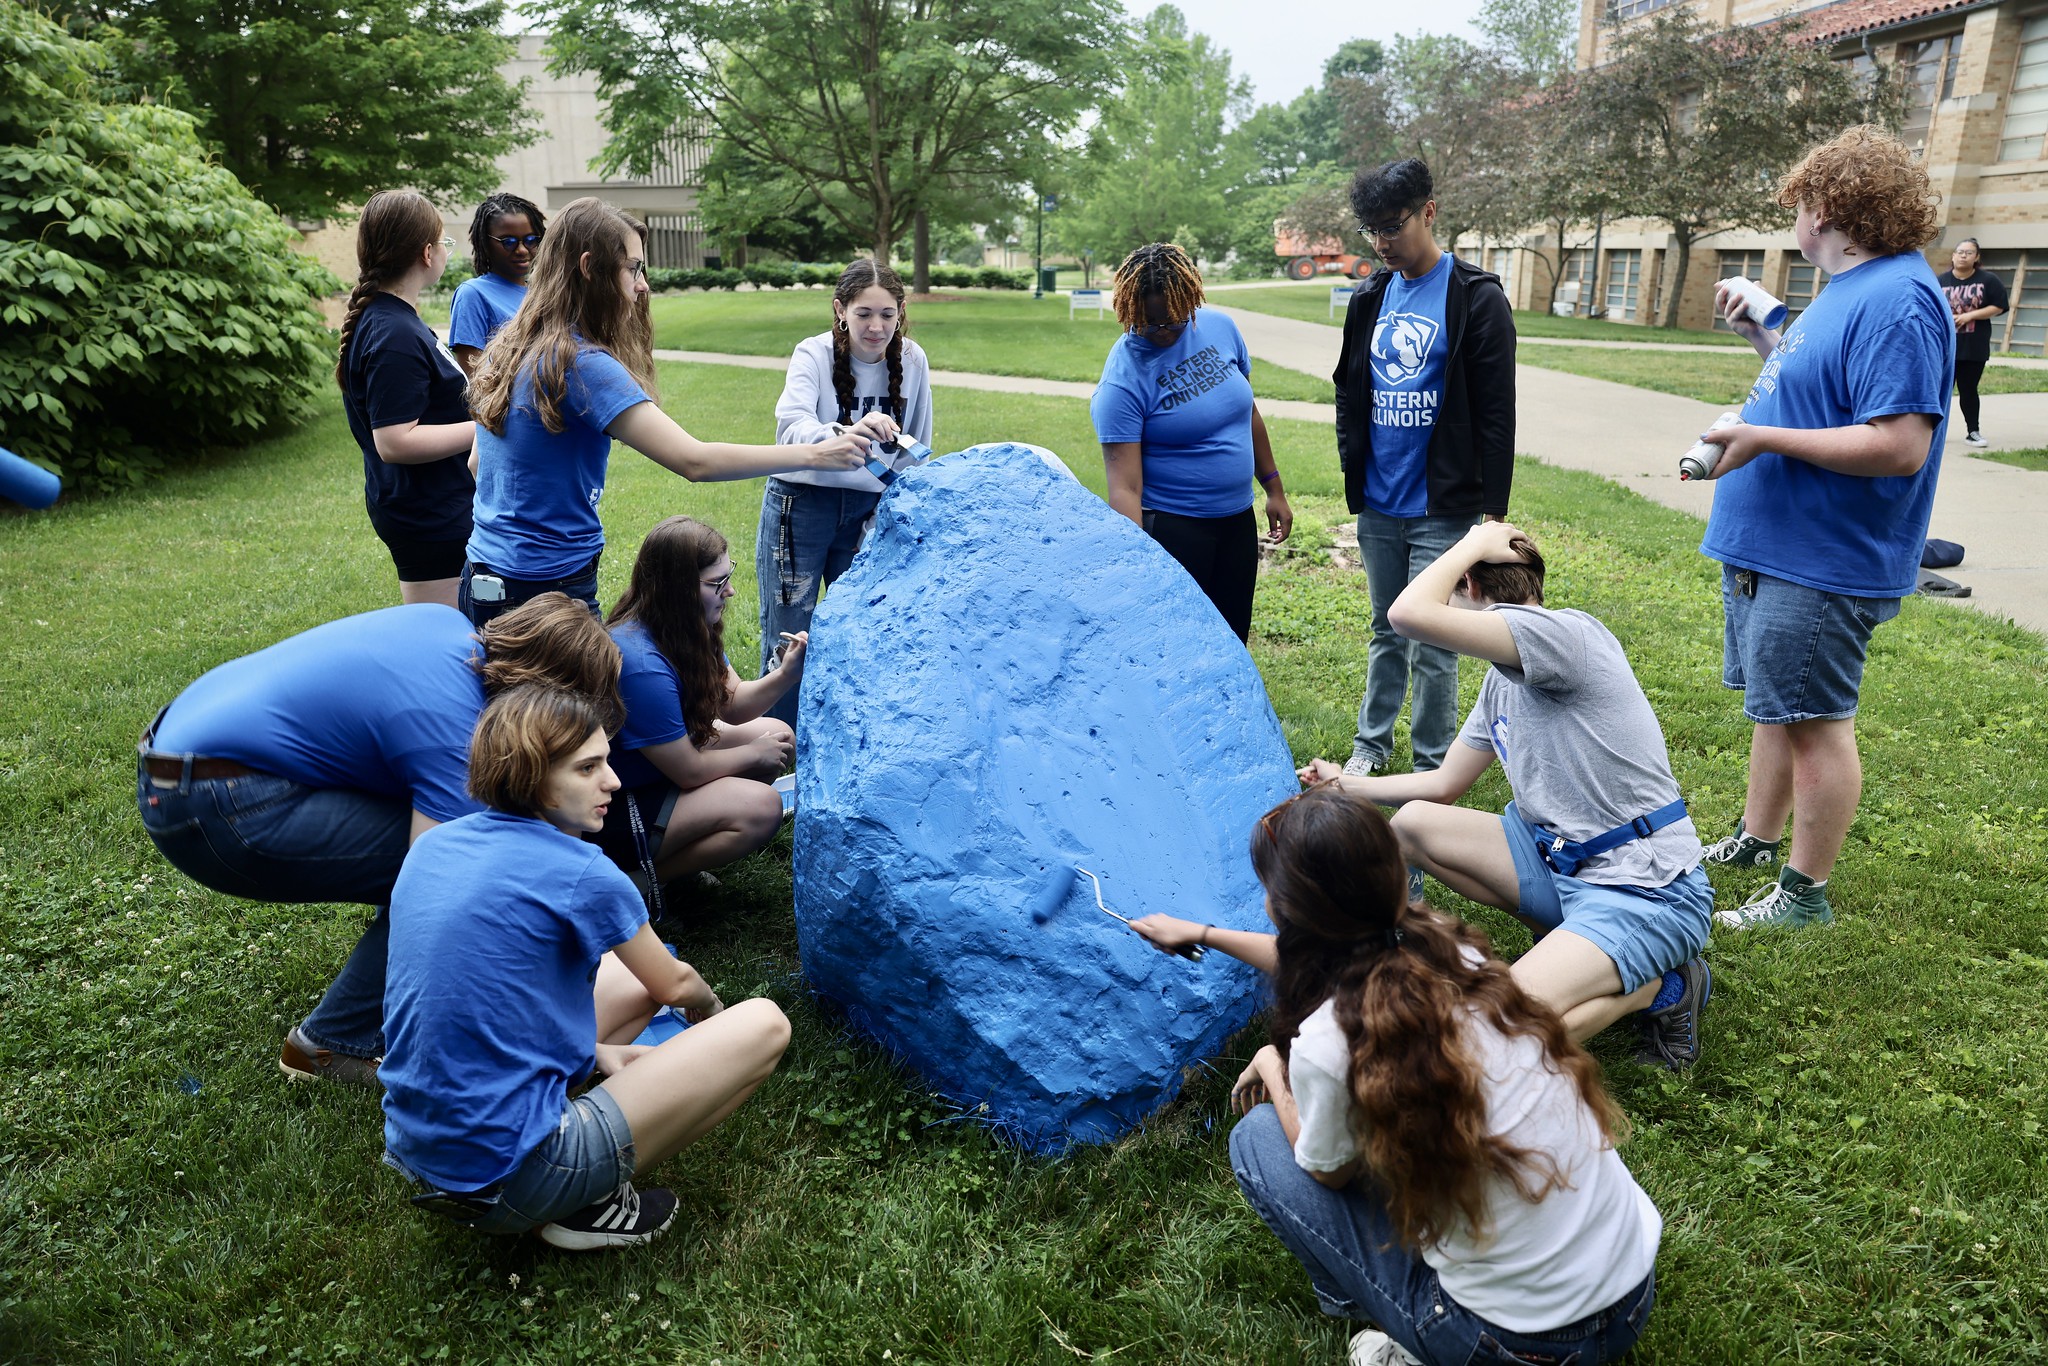 Orientation Student Ambassadors paint the EIU Spirit Rock for the first time